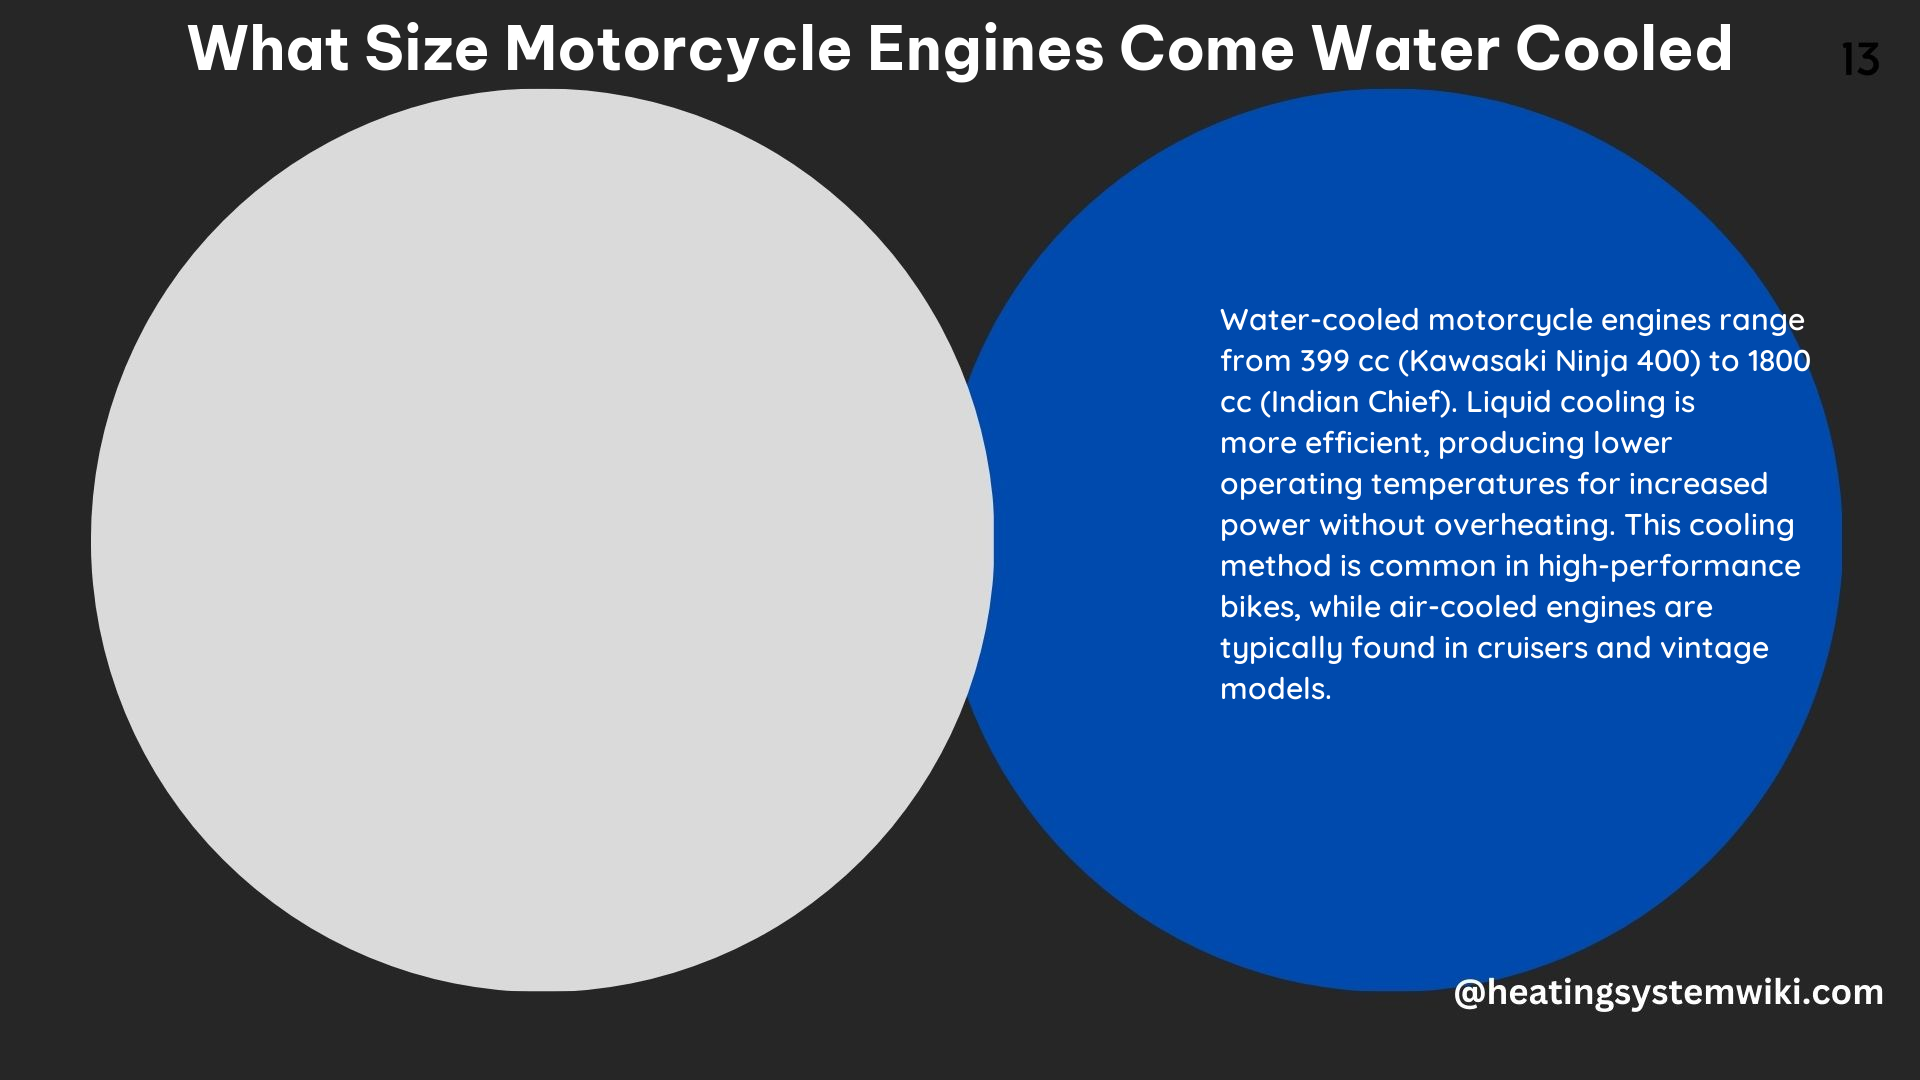 What Size Motorcycle Engines Come Water Cooled